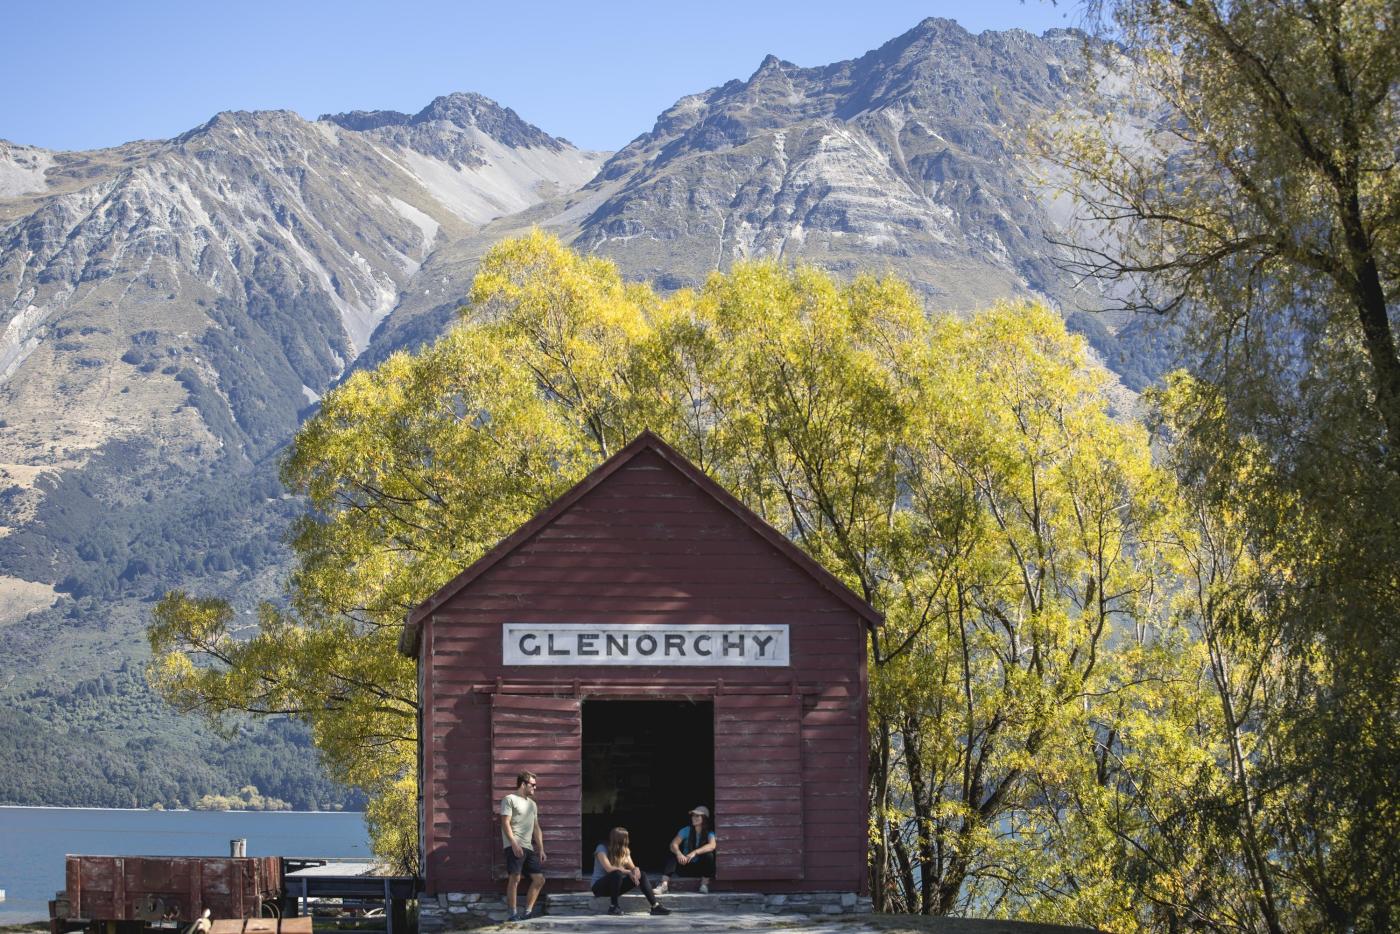 Friends sitting outside the Glenorchy Red Shed